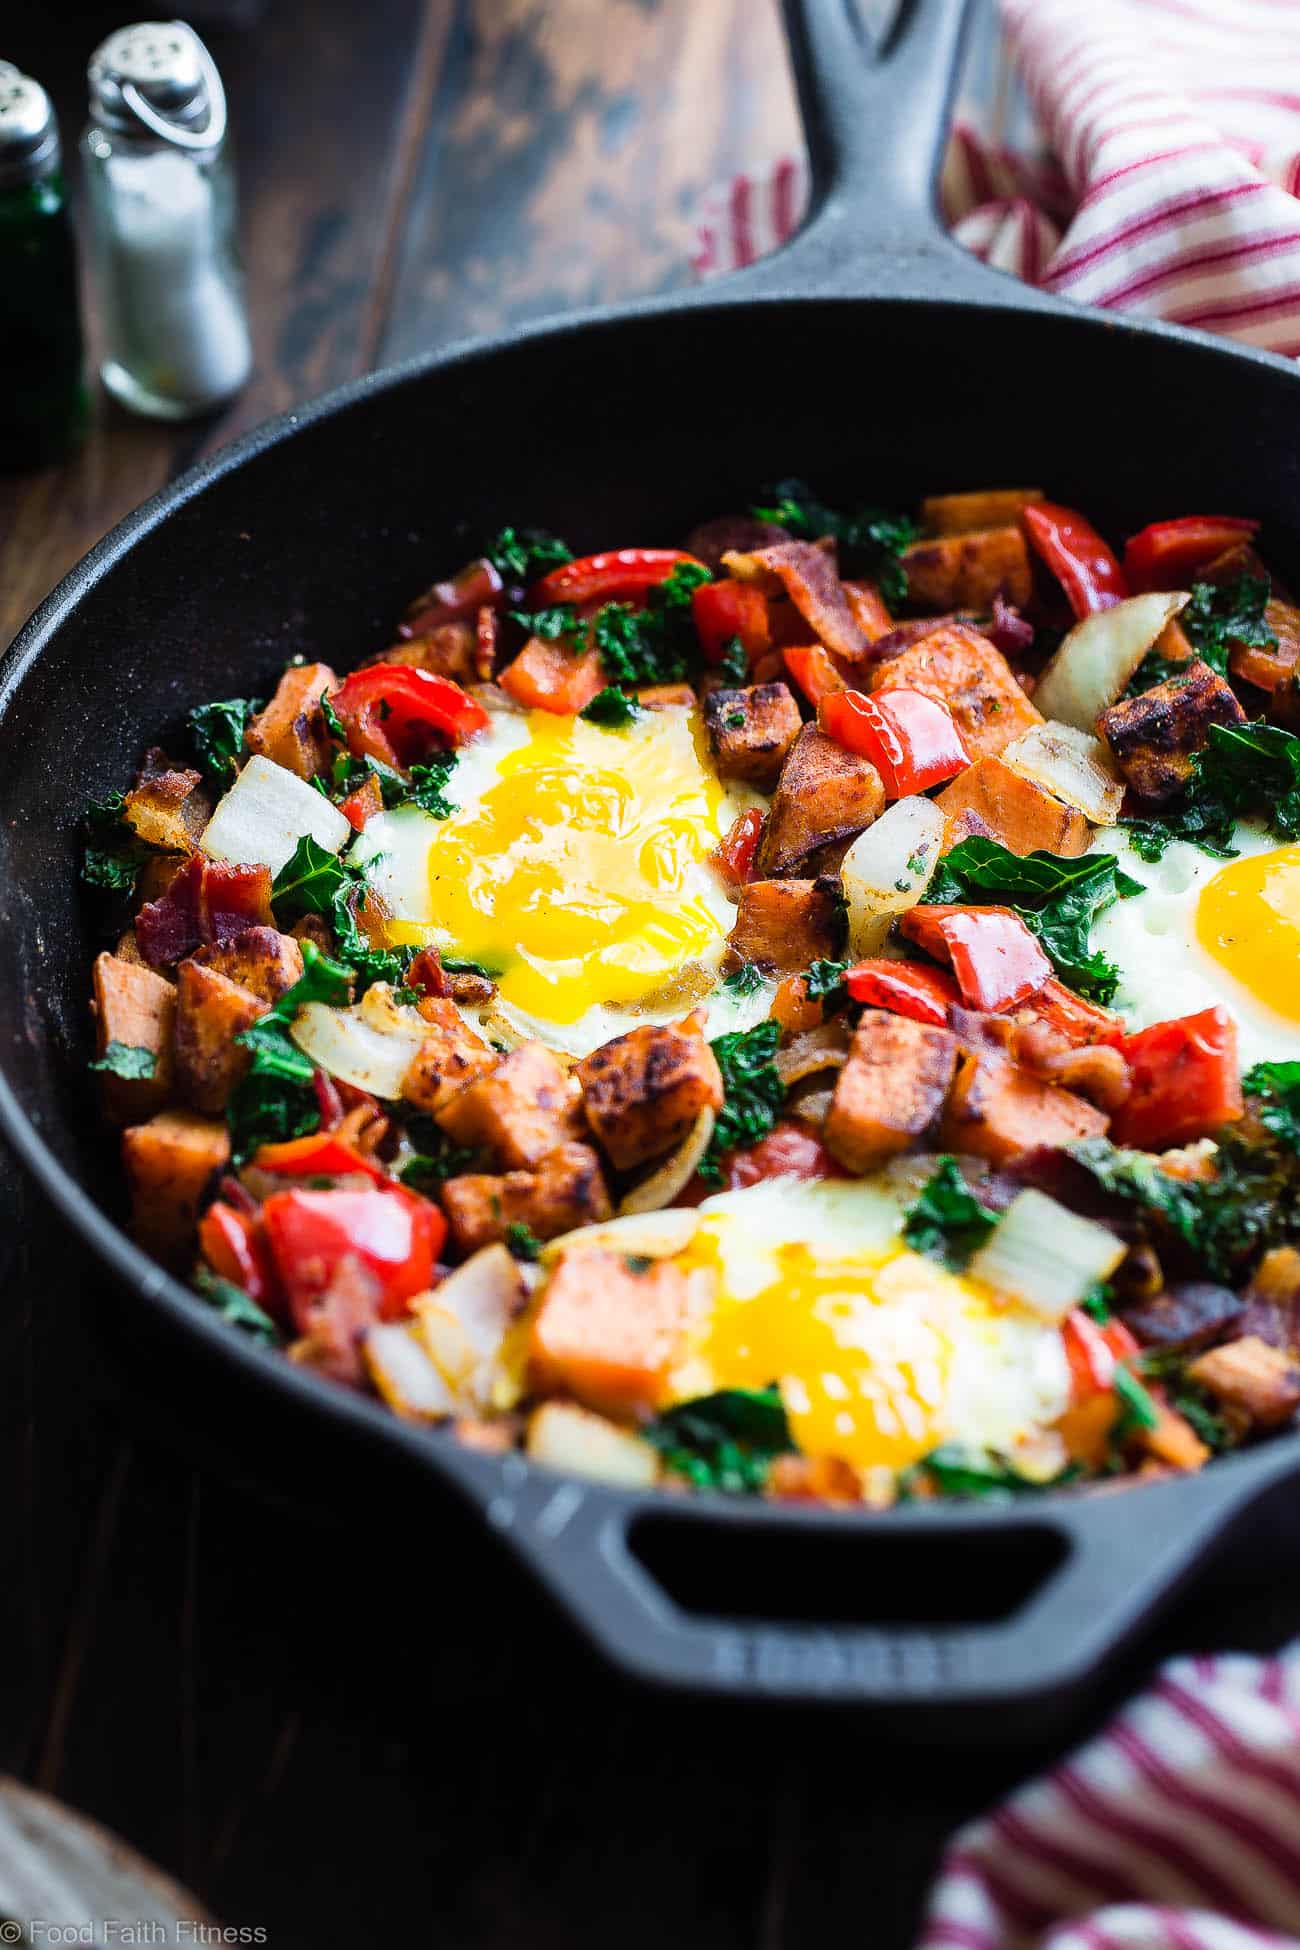 Healthy Paleo Sweet Potato Breakfast Hash with Bacon -This 30 minute, paleo friendly sweet potato hash with eggs makes a quick, delicious and healthy breakfast that is gluten/grain/dairy/sugar free and only 310 calories!| #Foodfaithfitness.com | #Paleo #Glutenfree #Whole30 #Healthy #Breakfast